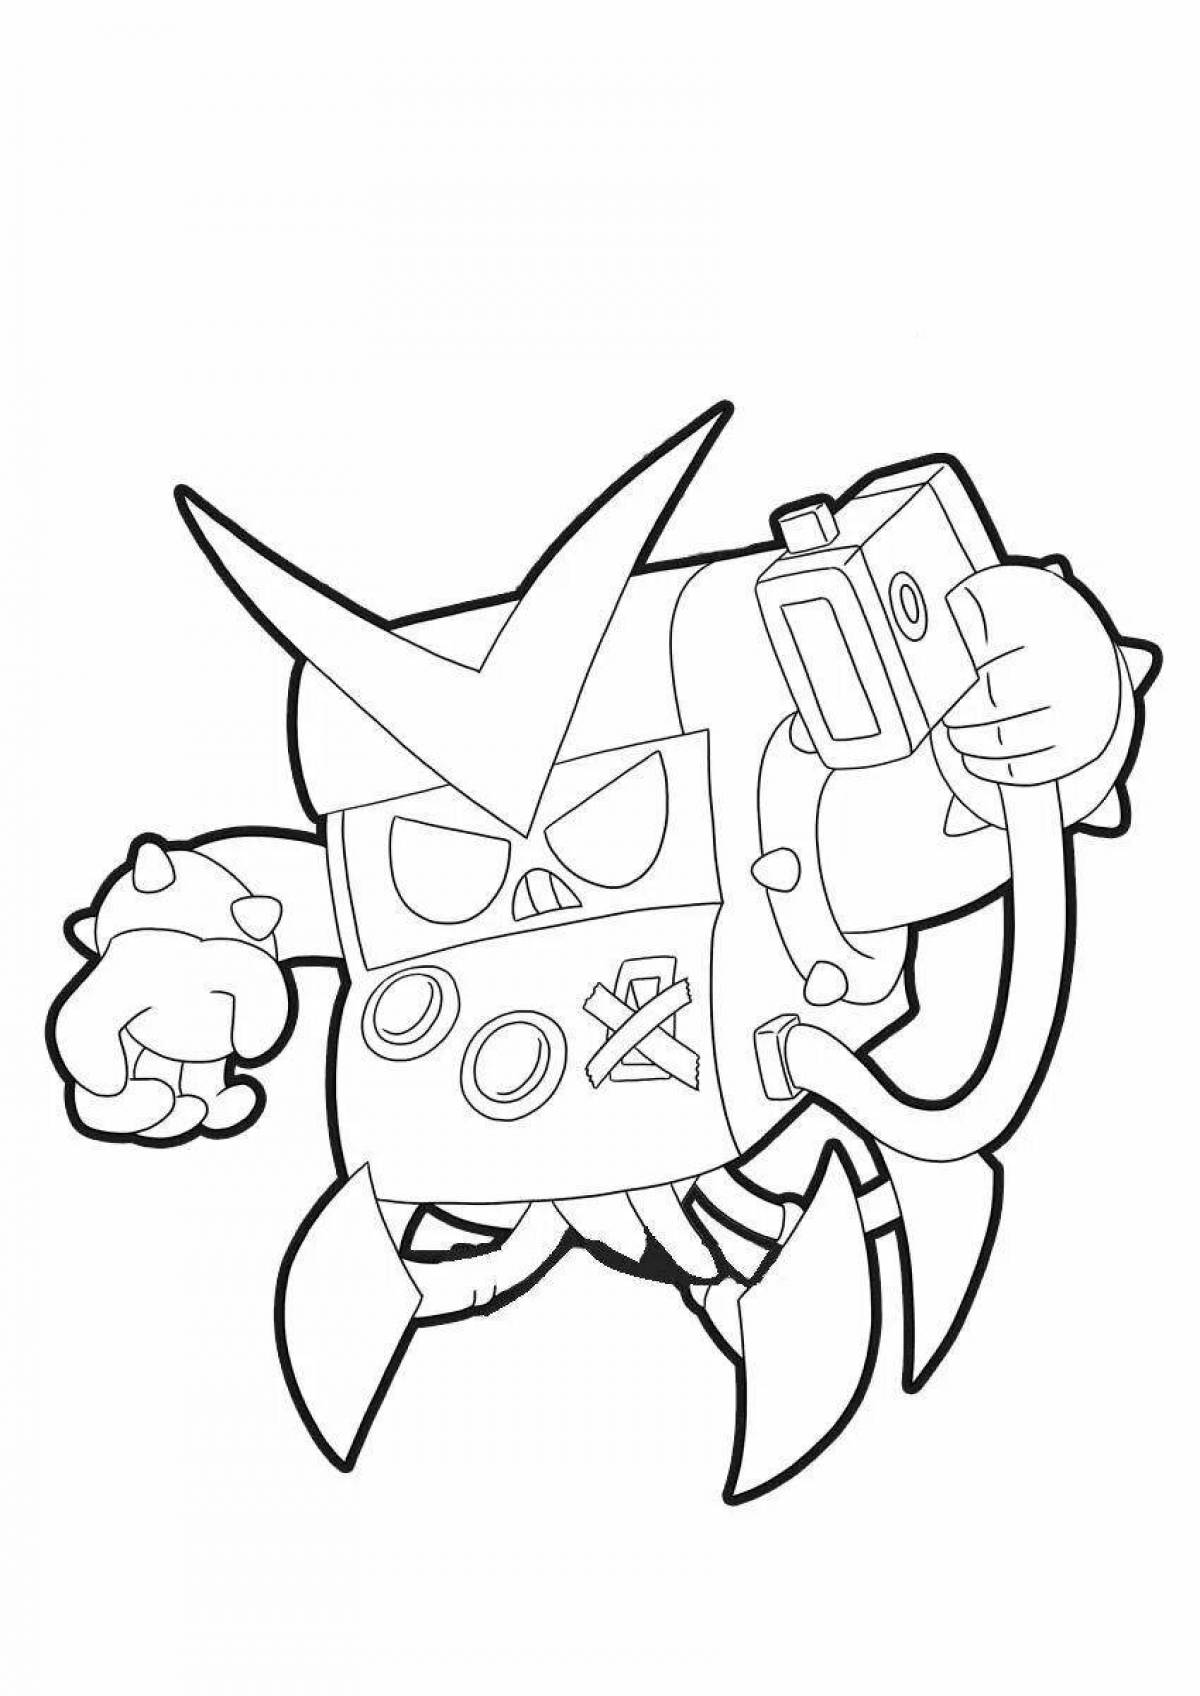 Awesome bravo stars buzz coloring page